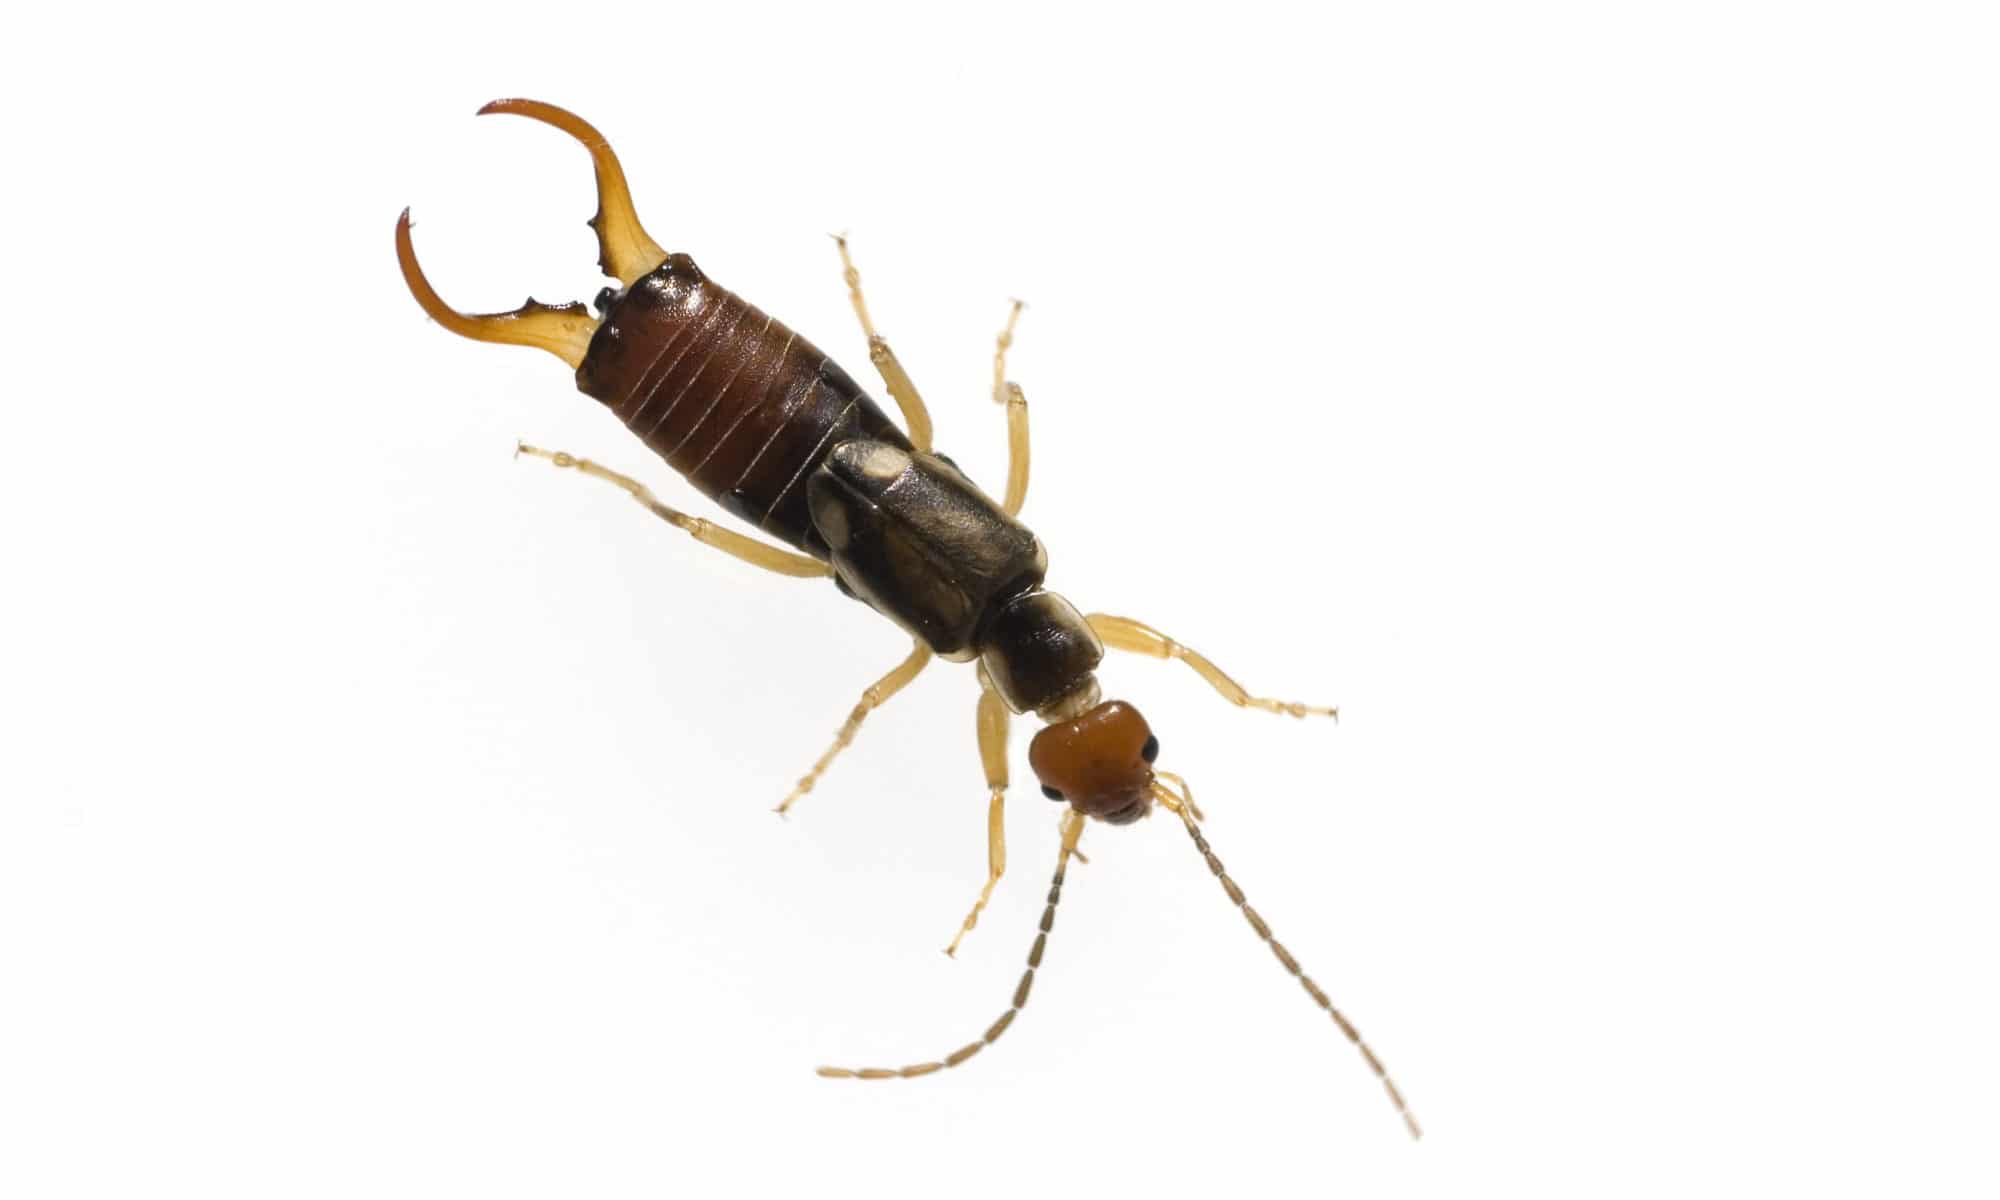 An earwig on a white background